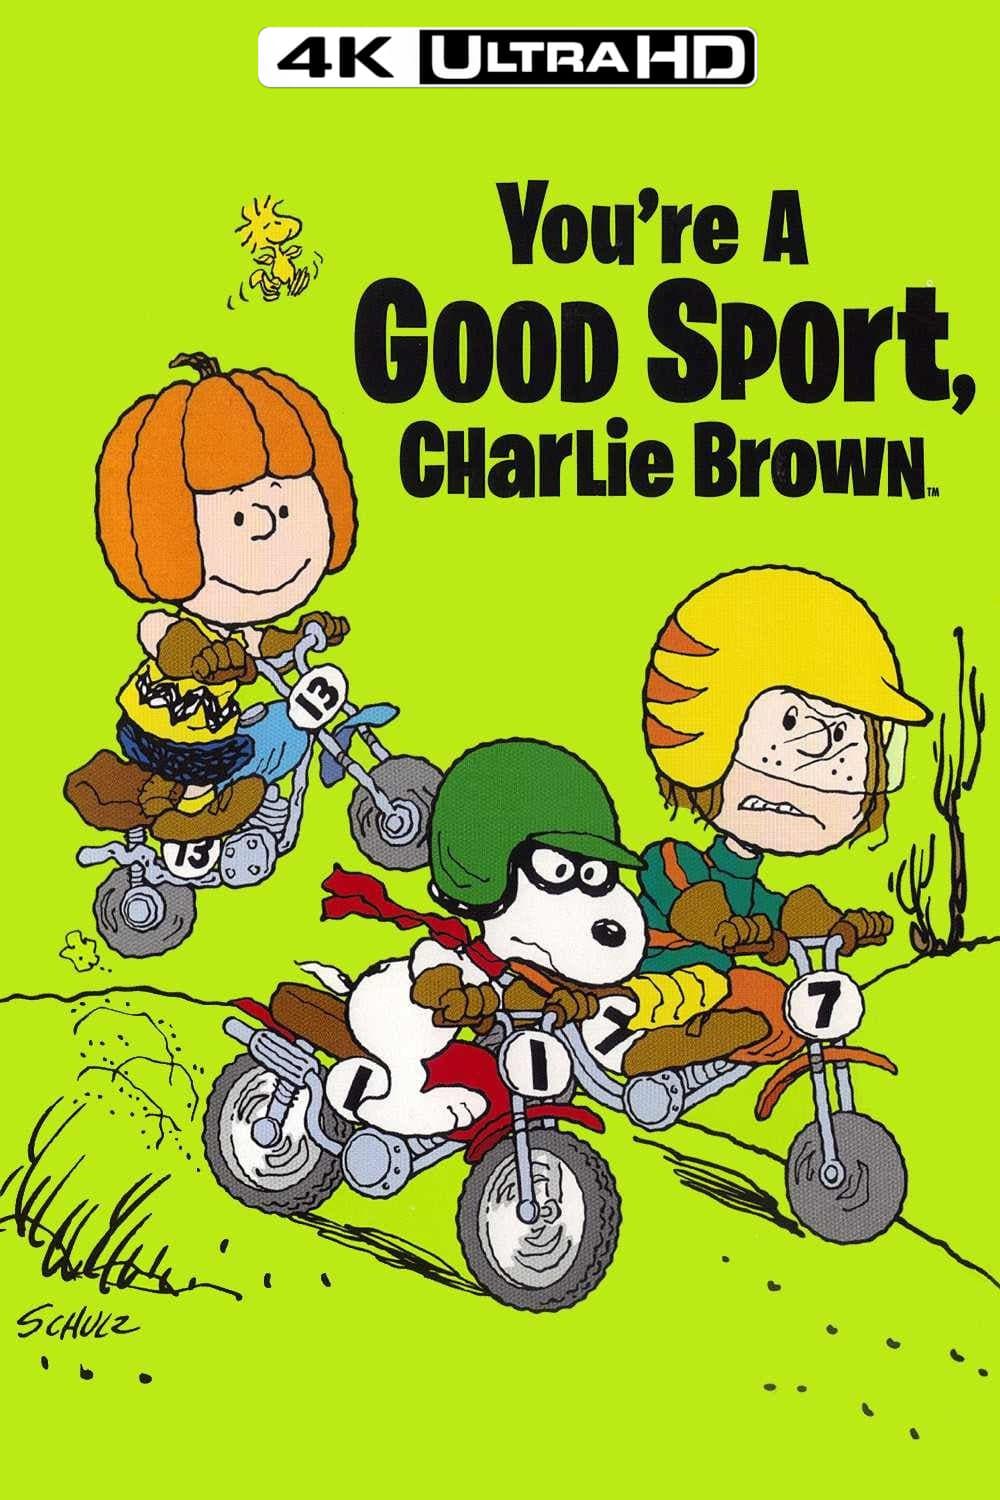 You're a Good Sport, Charlie Brown poster